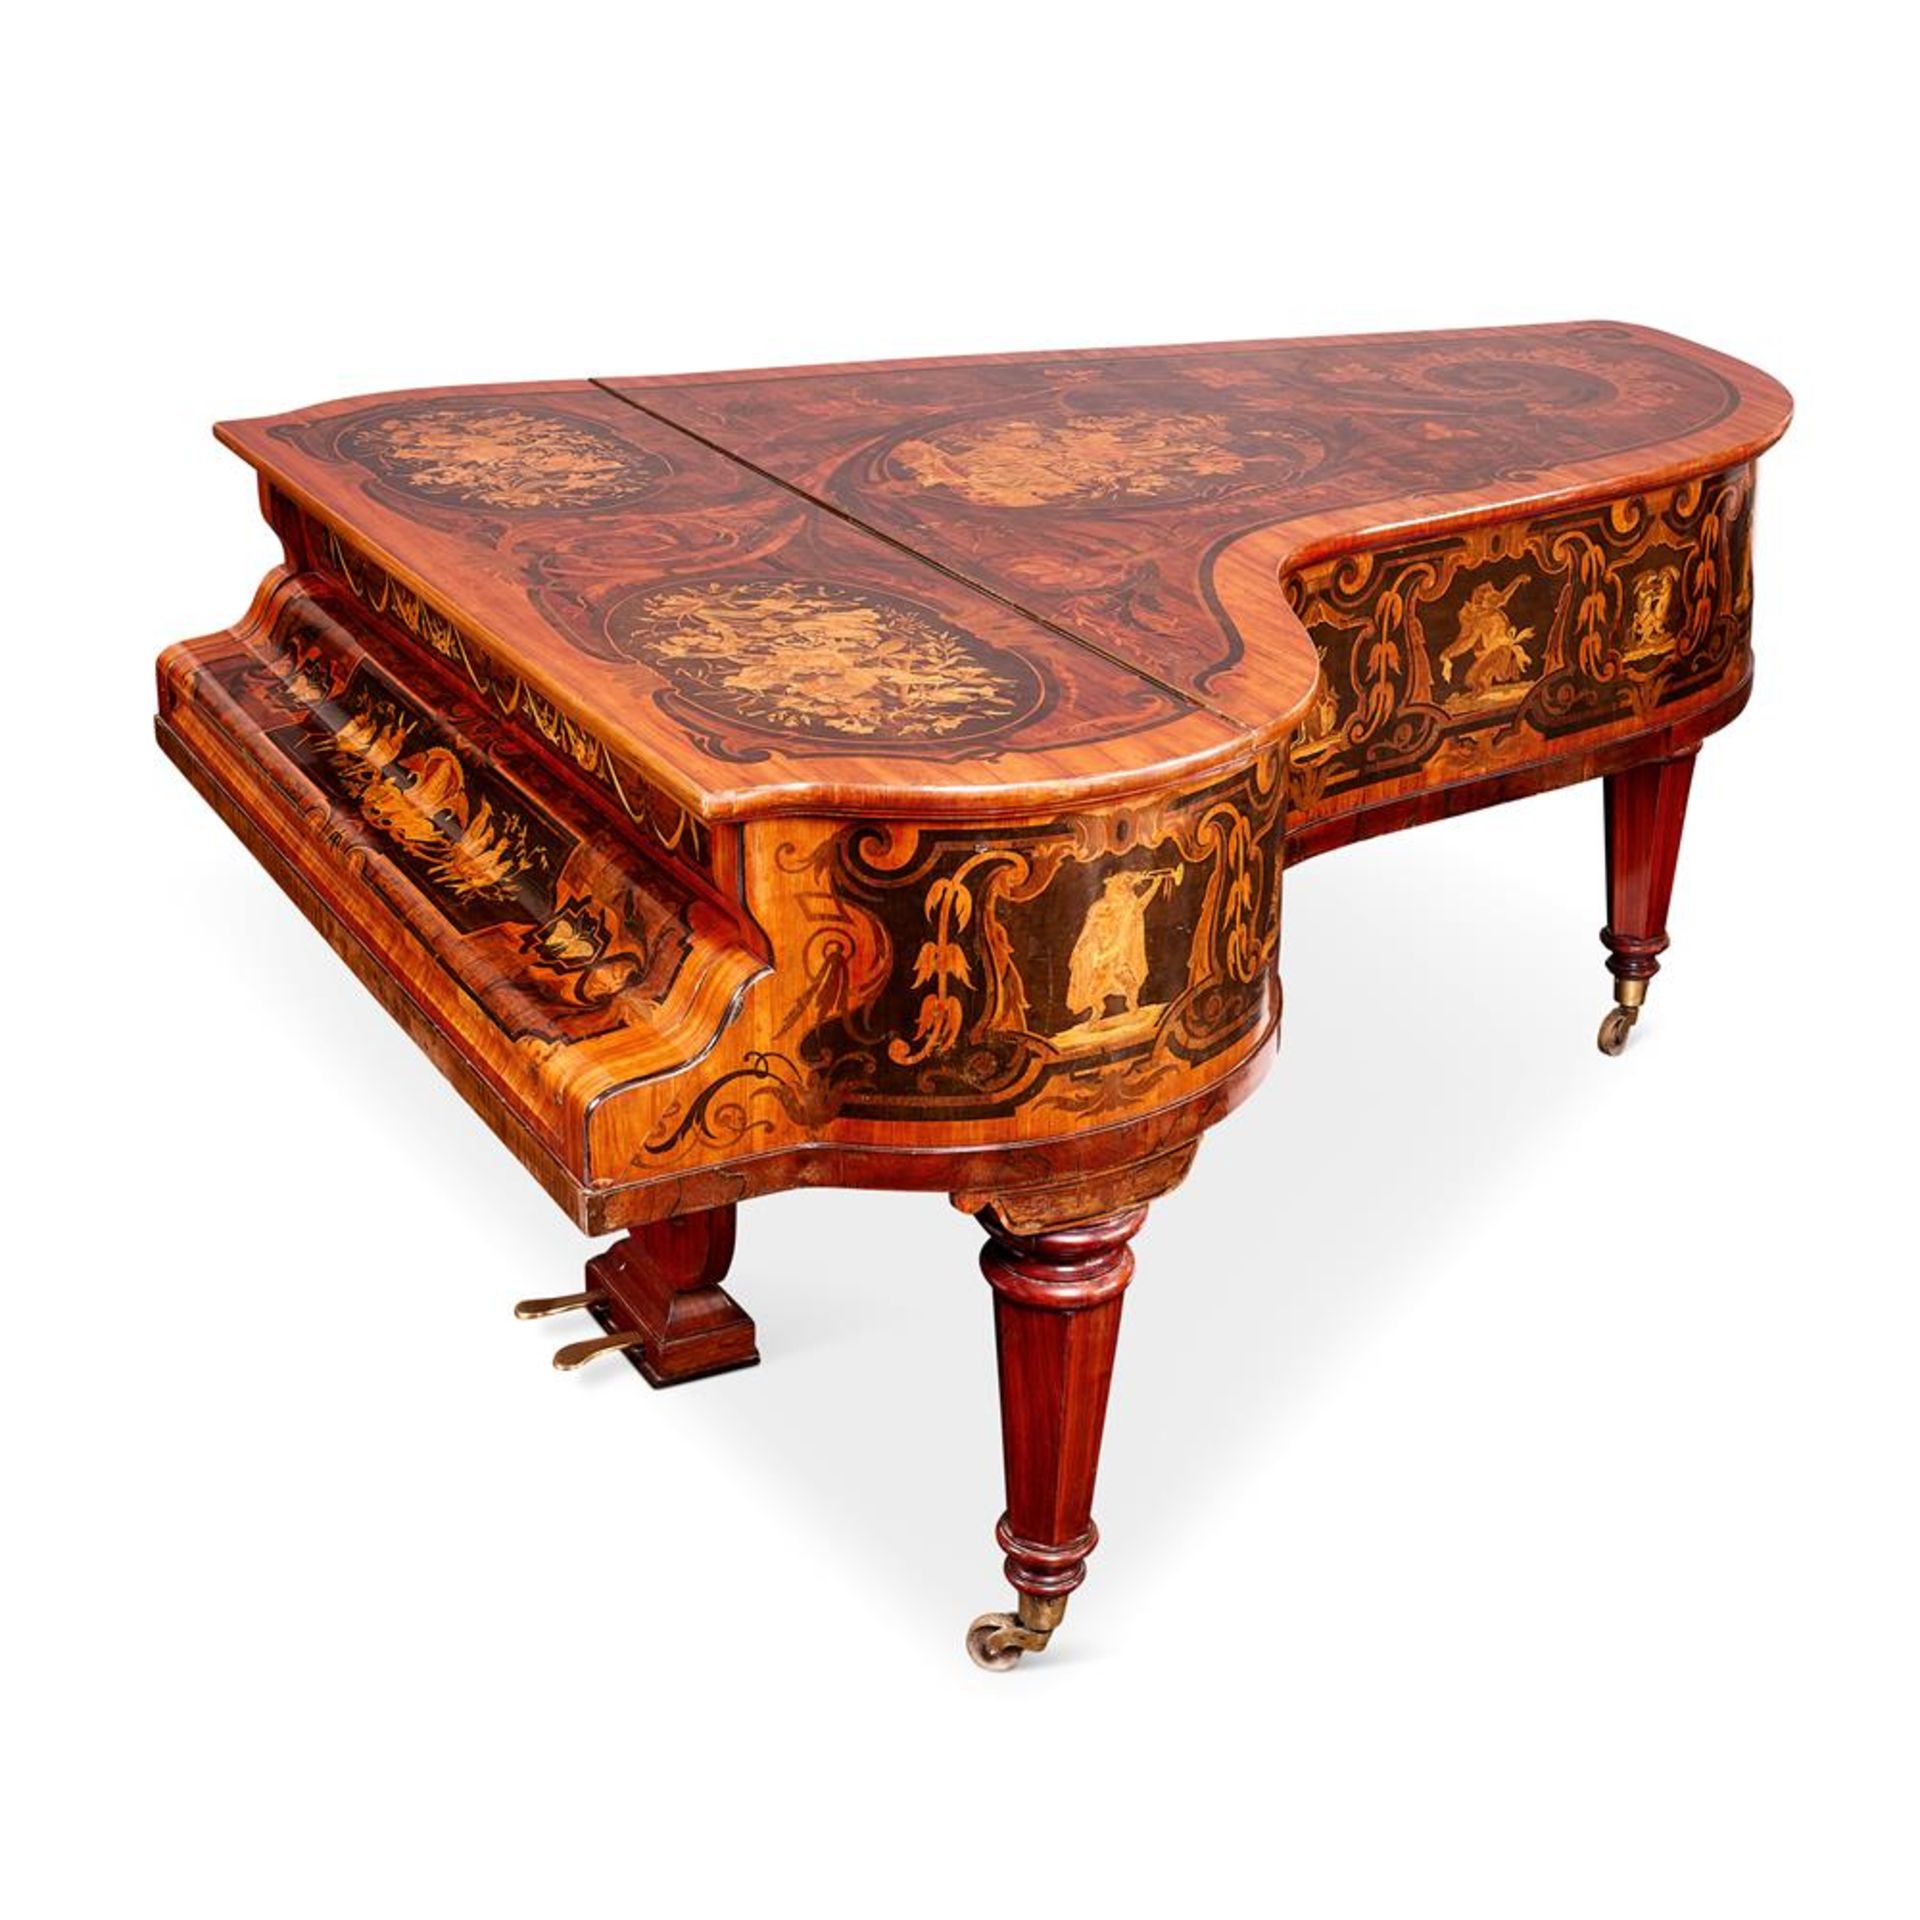 Y A RUSSIAN ROSEWOOD, GONCALO ALVES, TULIPWOOD AND MARQUETRY GRAND PIANO, THIRD QUARTER 19TH CENTURY - Image 2 of 2